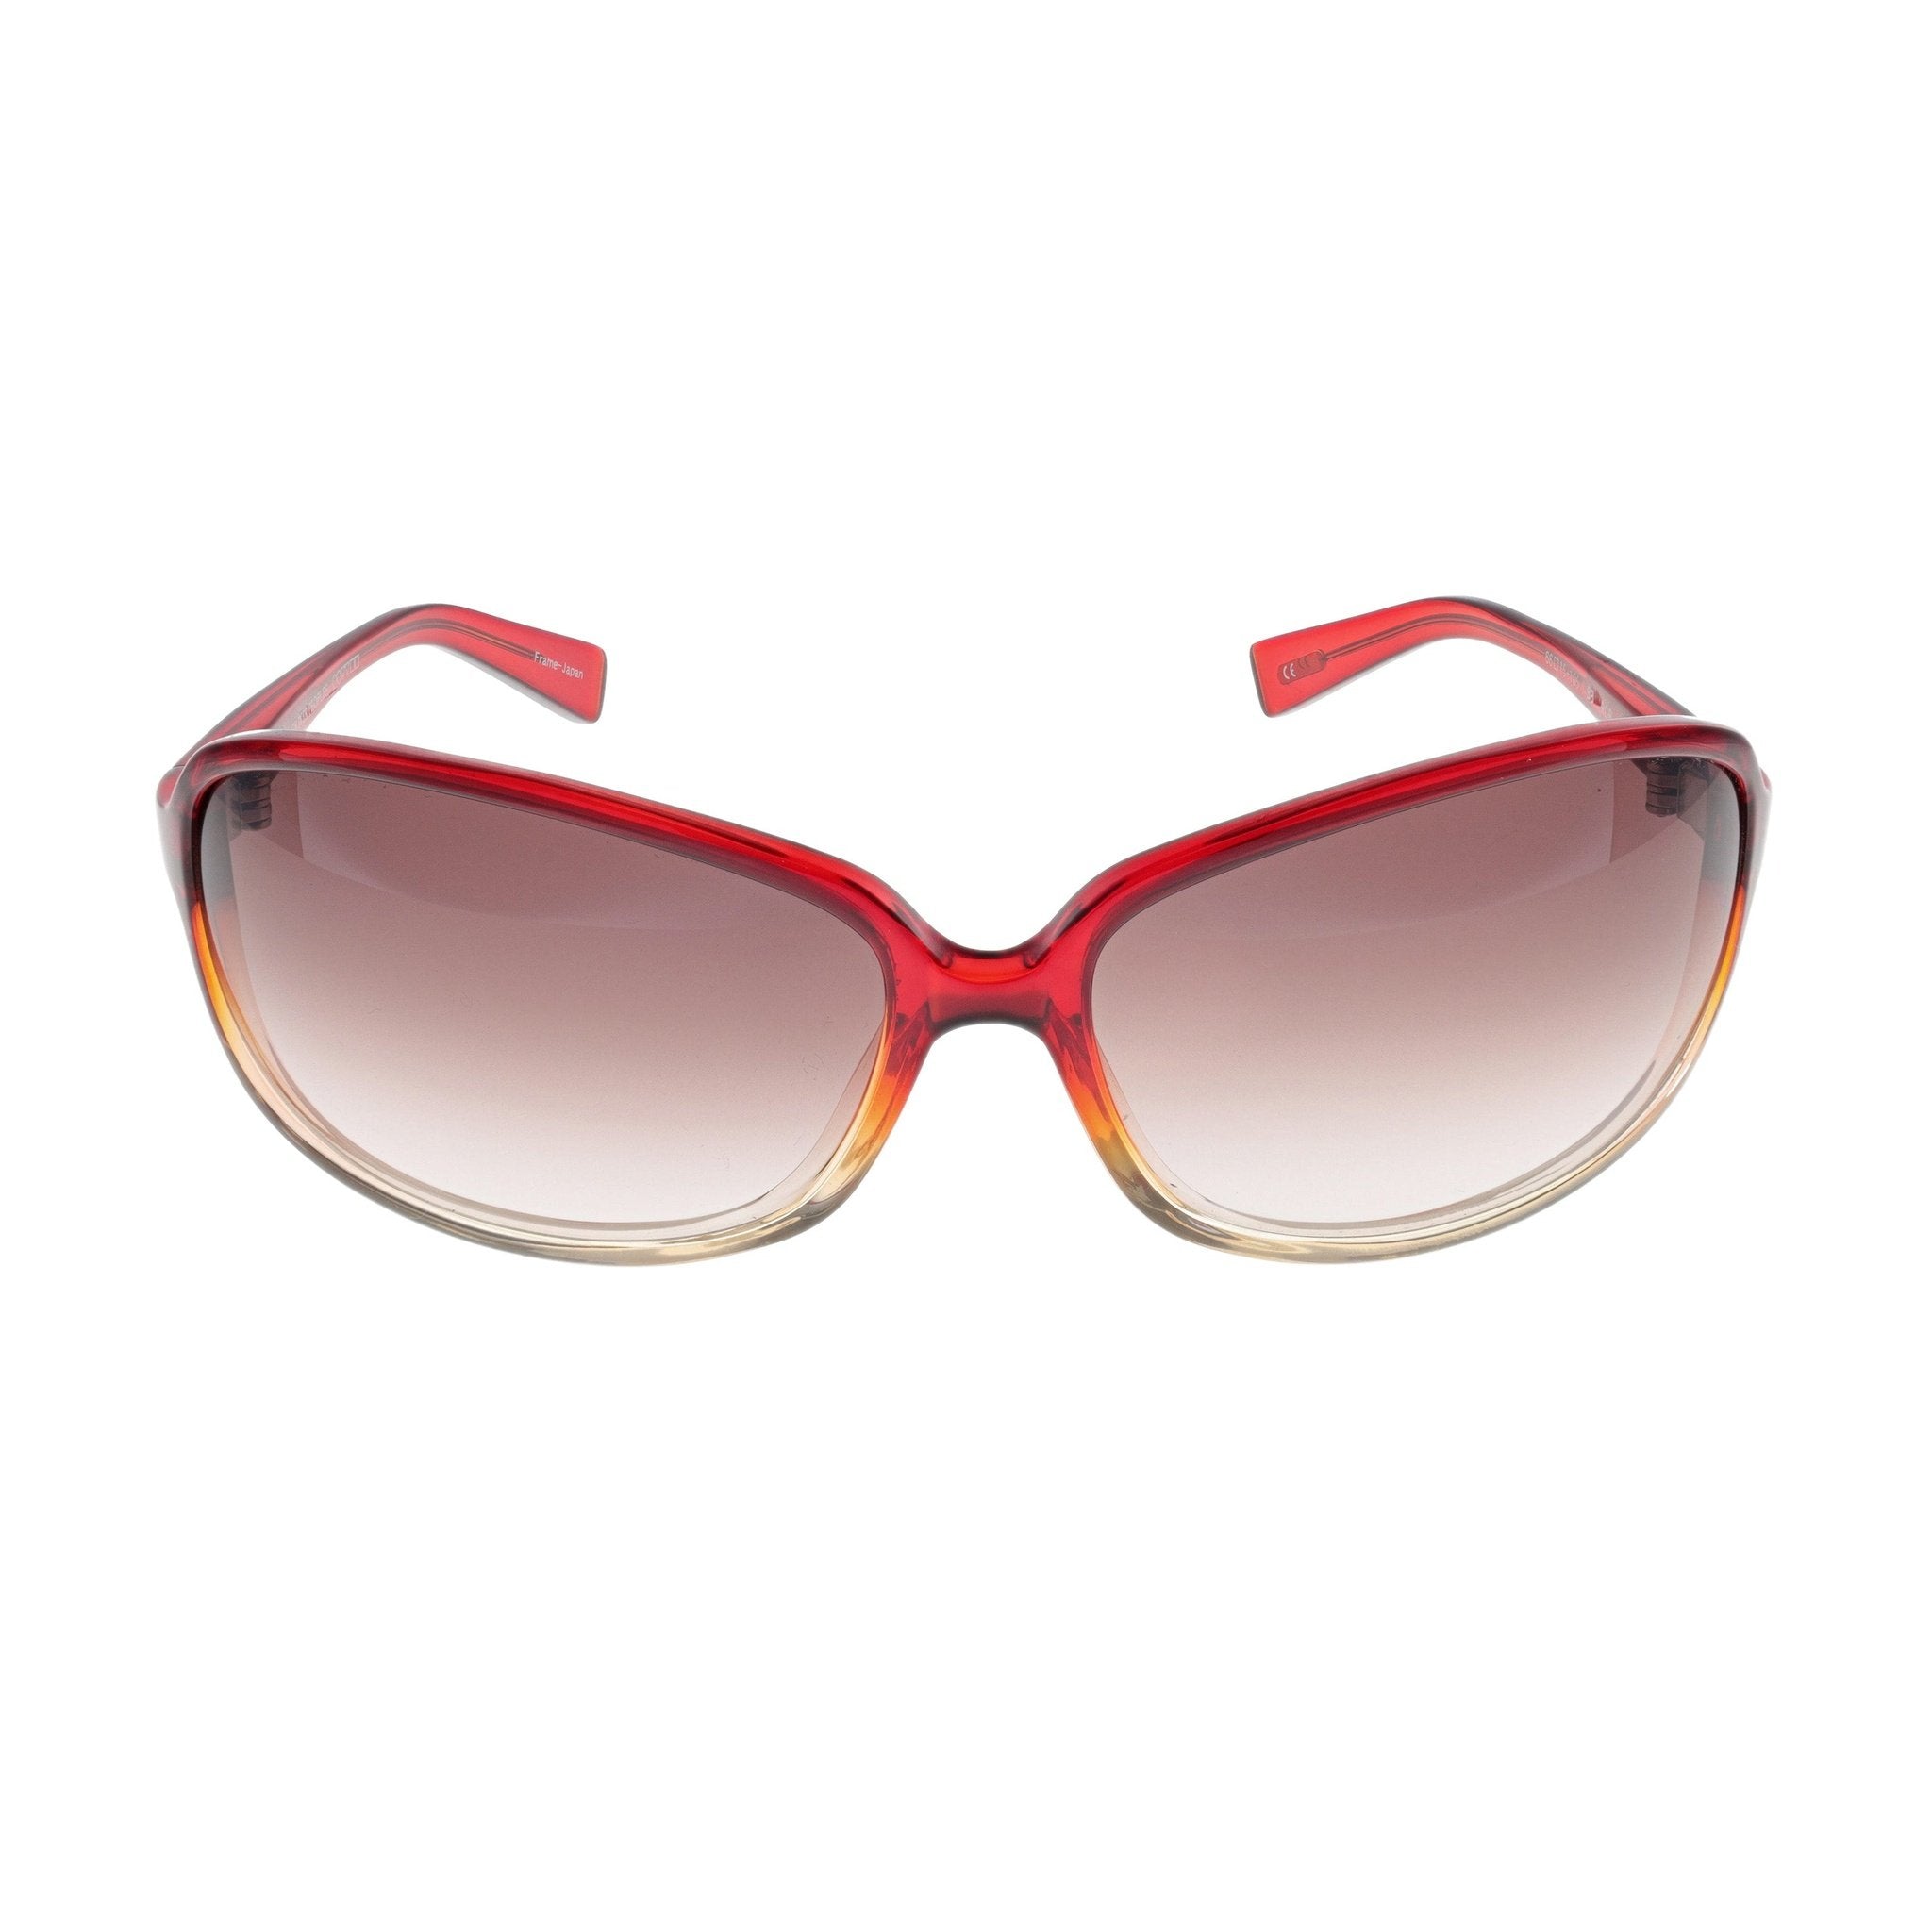 Oliver Peoples BB Sunglasses - Red